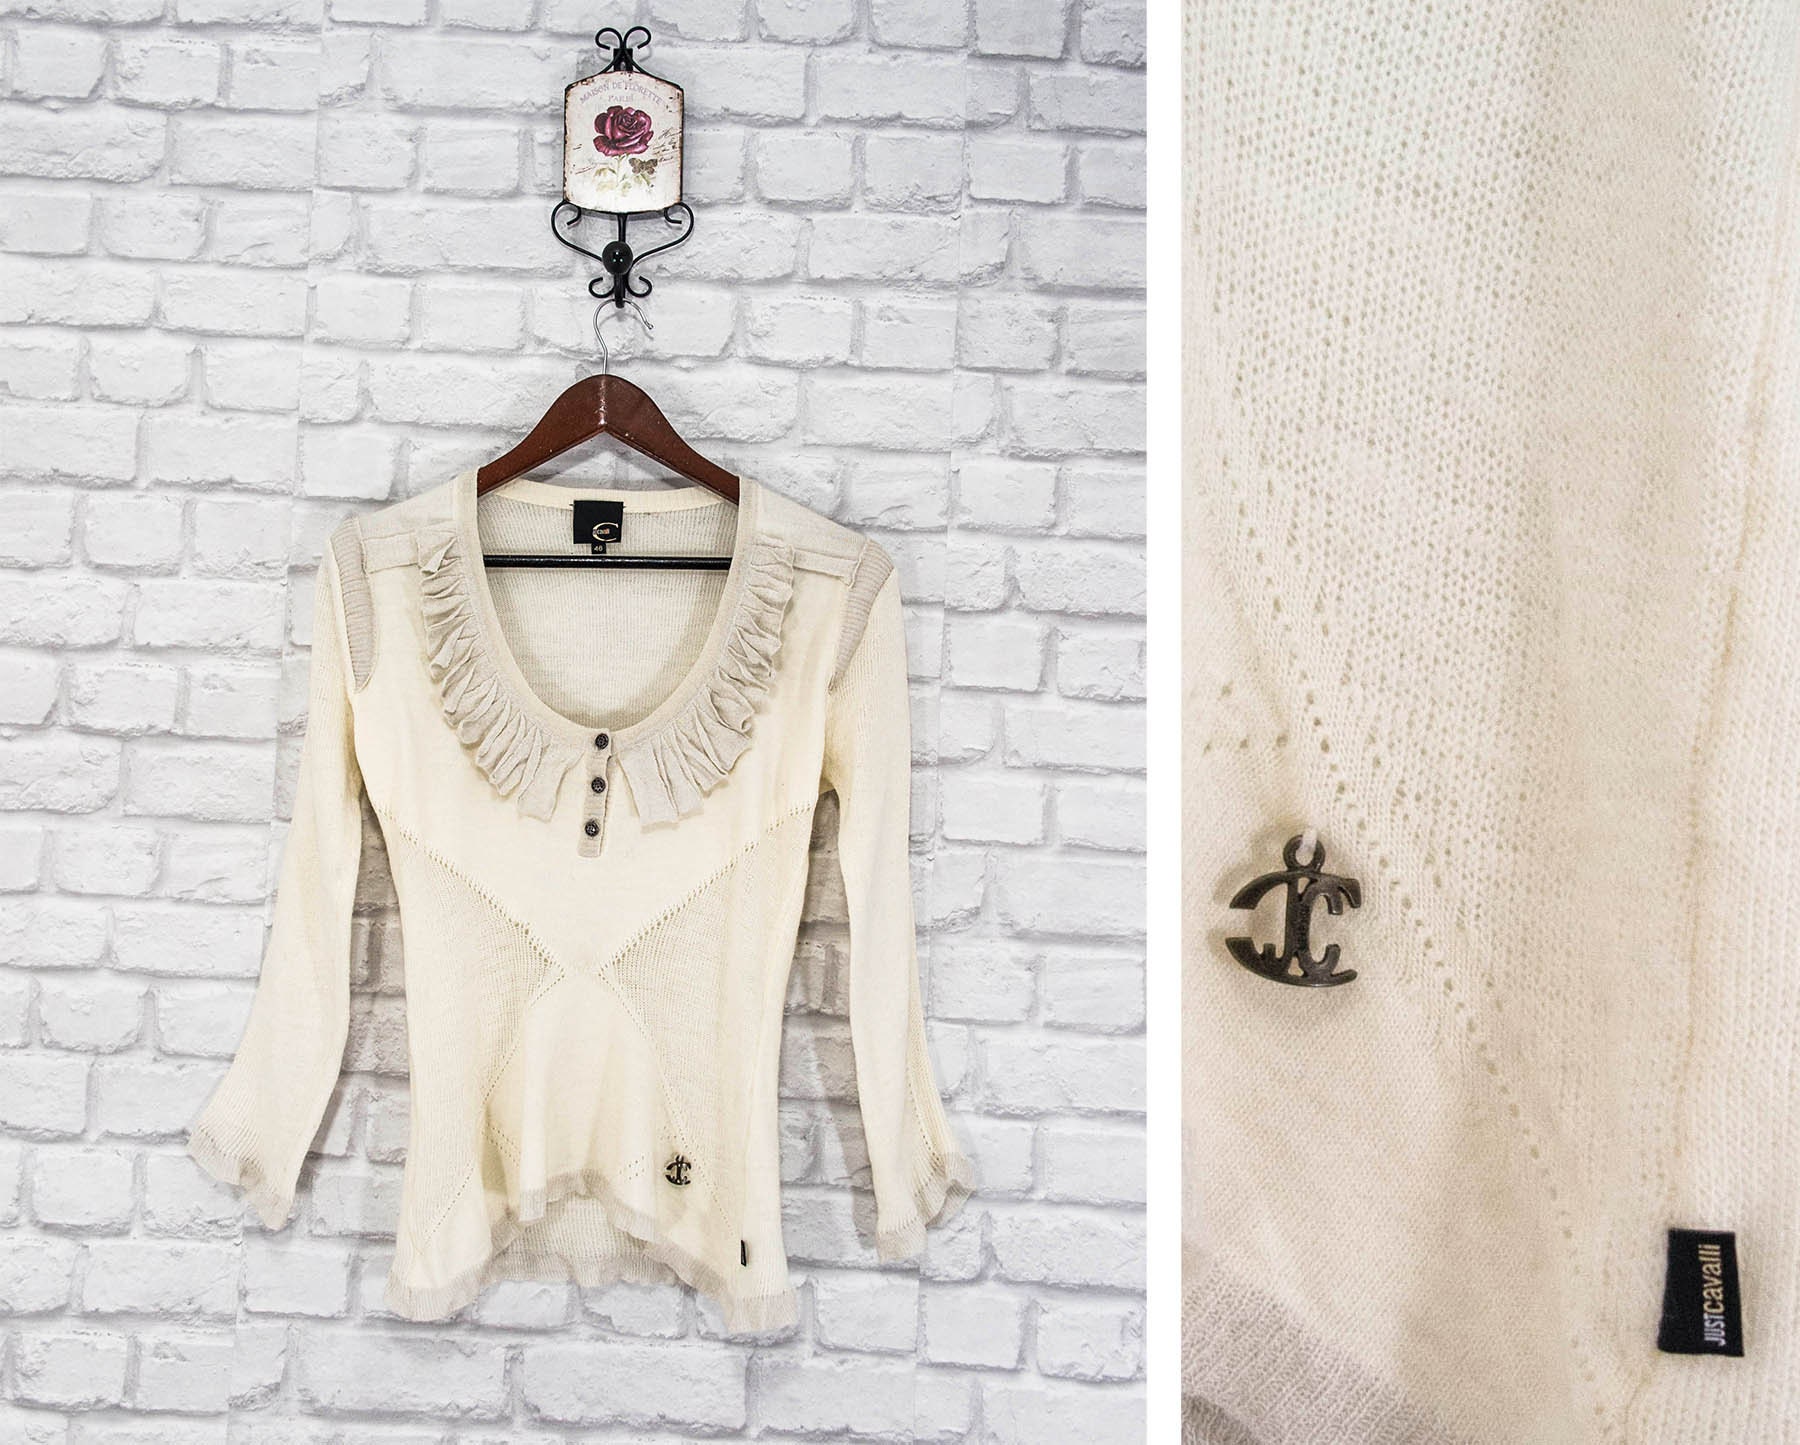 Vintage Just Cavalli Wool Blend Fine Cream Knit Womens Top Blouse Jumper Sweater Stretchy 3/4 Sleeve Size It46/Uk14/Us10/L